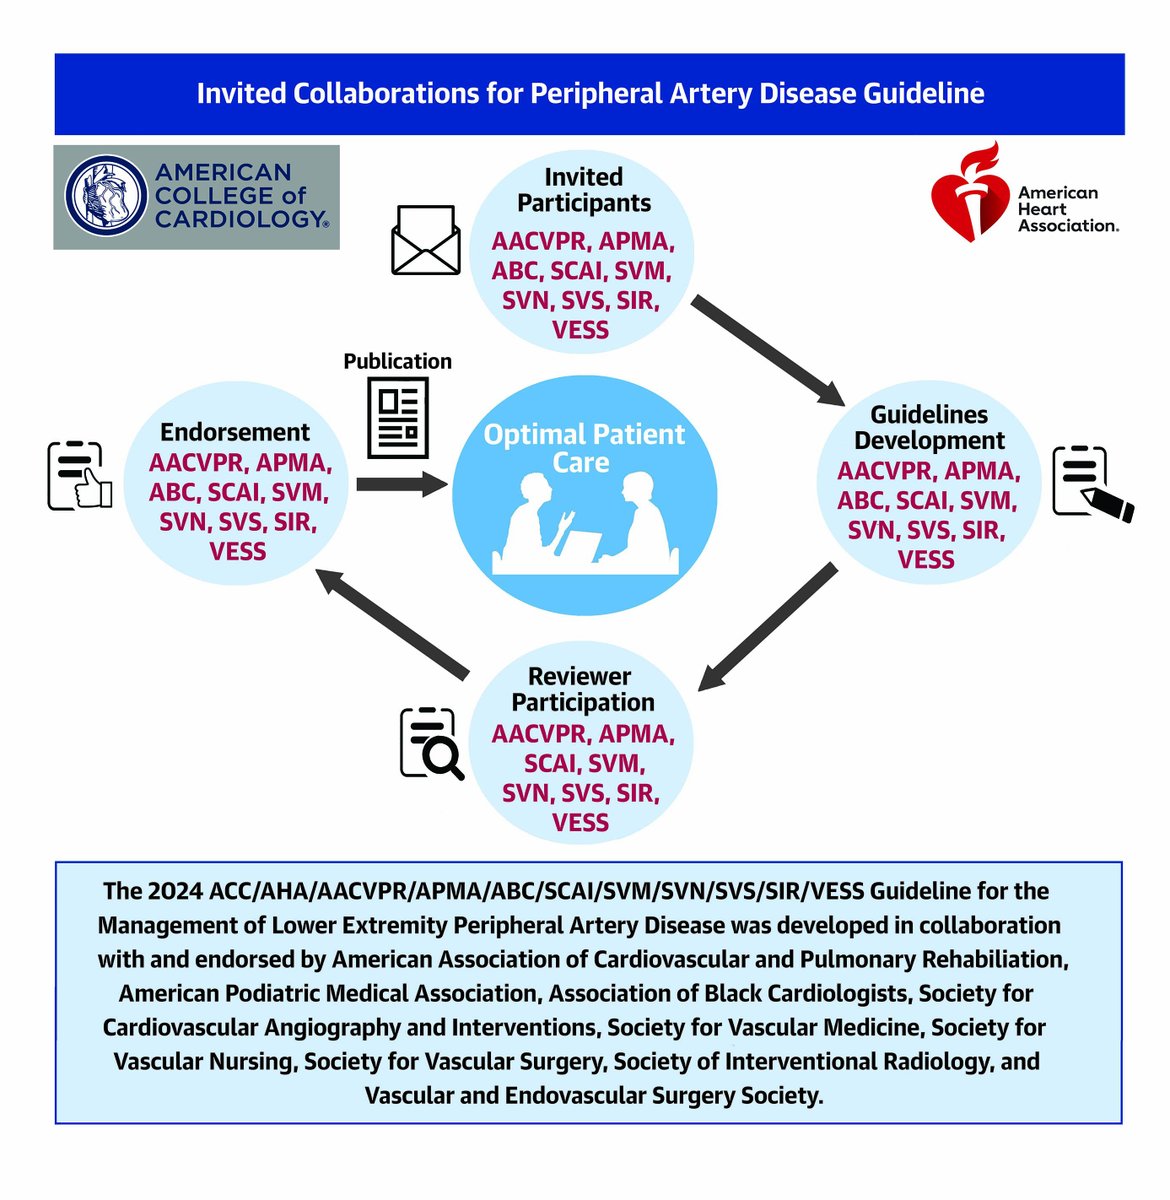 1/ Released today, the 2024 Peripheral Artery Disease Guideline was developed by AHA and @ACCIntouch in collaboration with and endorsed by: @AACVPR @APMA @abcardio1 @SCAI @SVM_tweets @for_svn @VascularSVS @SIRspecialists @VESurgery 📷 The process for multi-society involvement